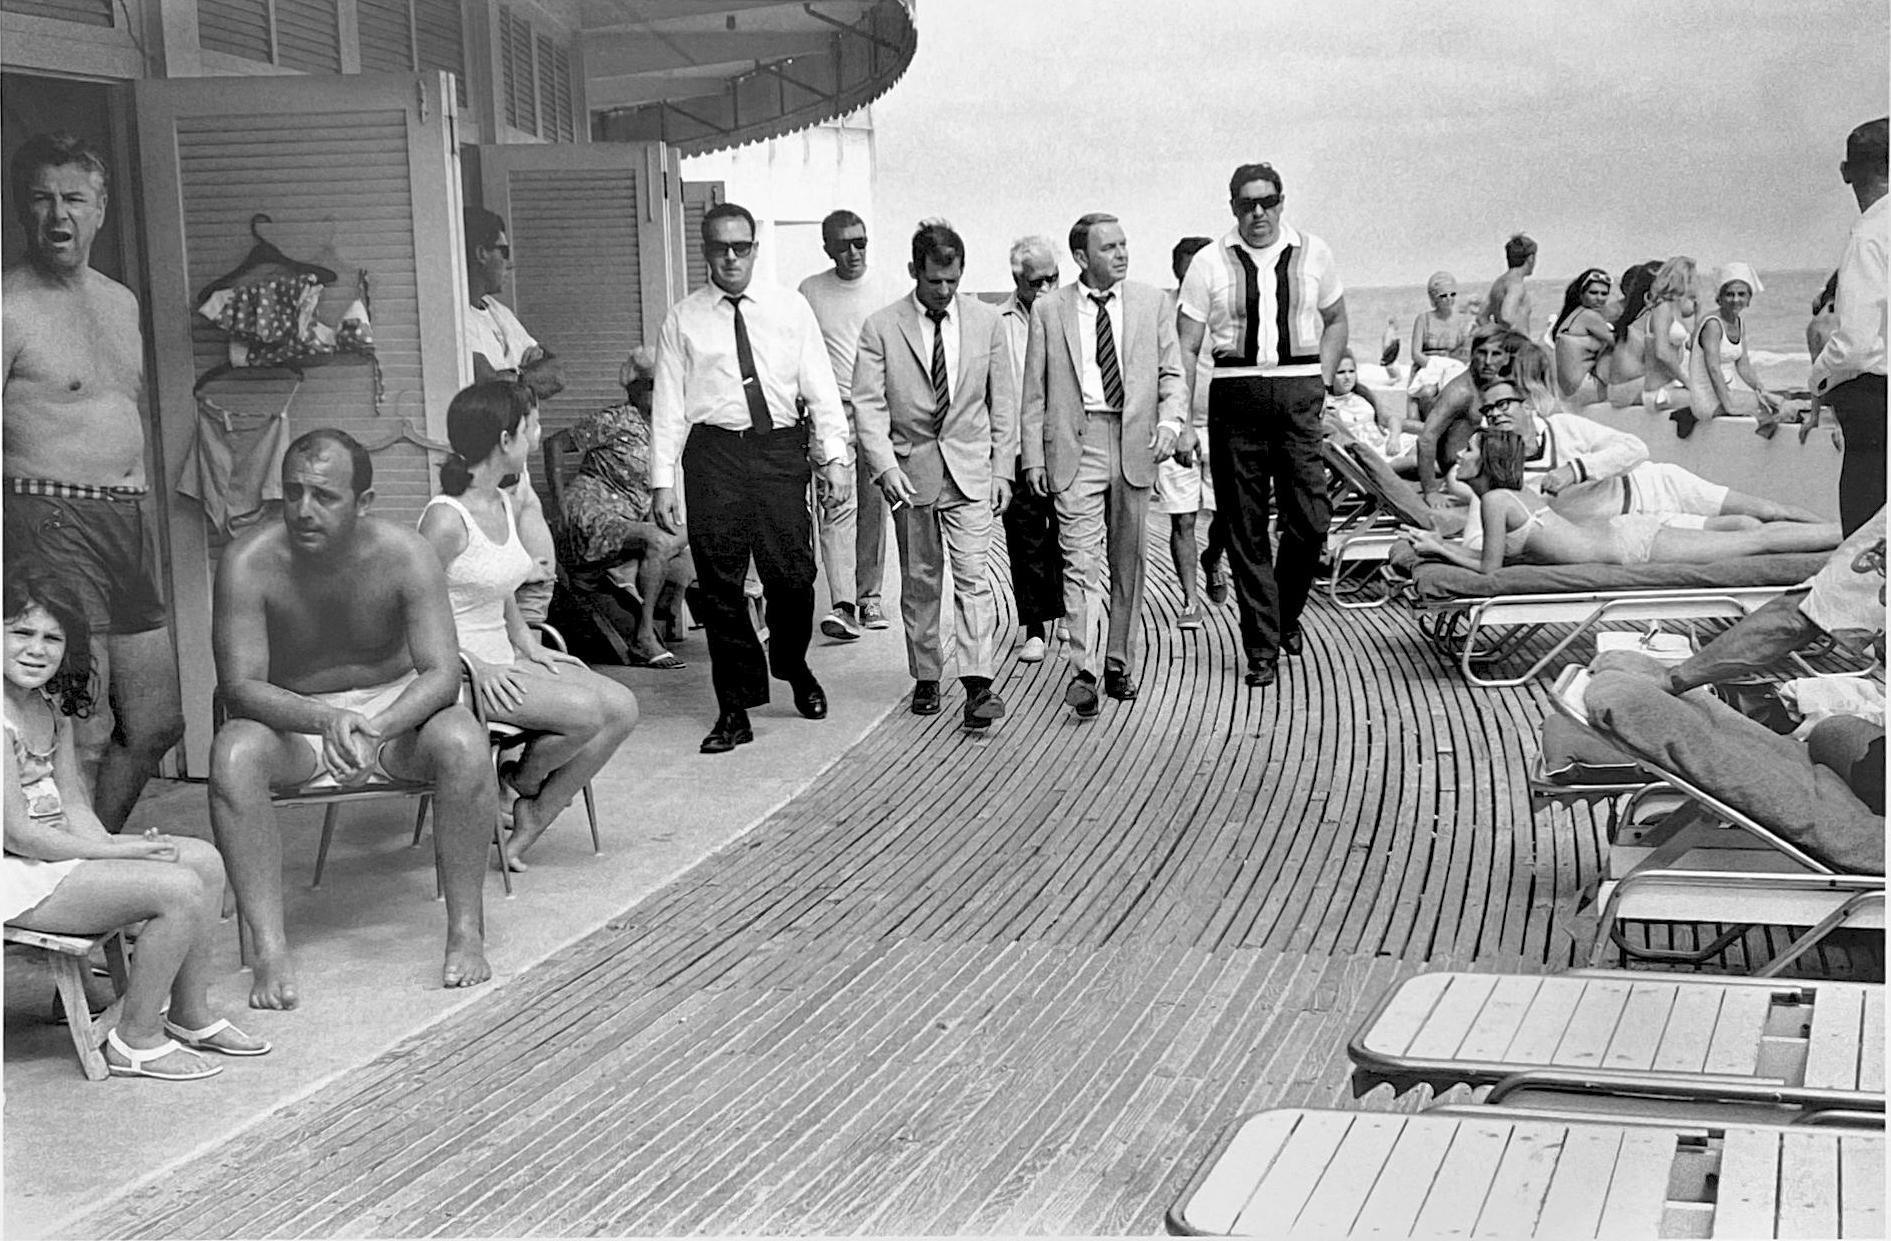 Terry O'Neill Black and White Photograph - Frank Sinatra on the Boardwalk, View 2 (20”x 24”)